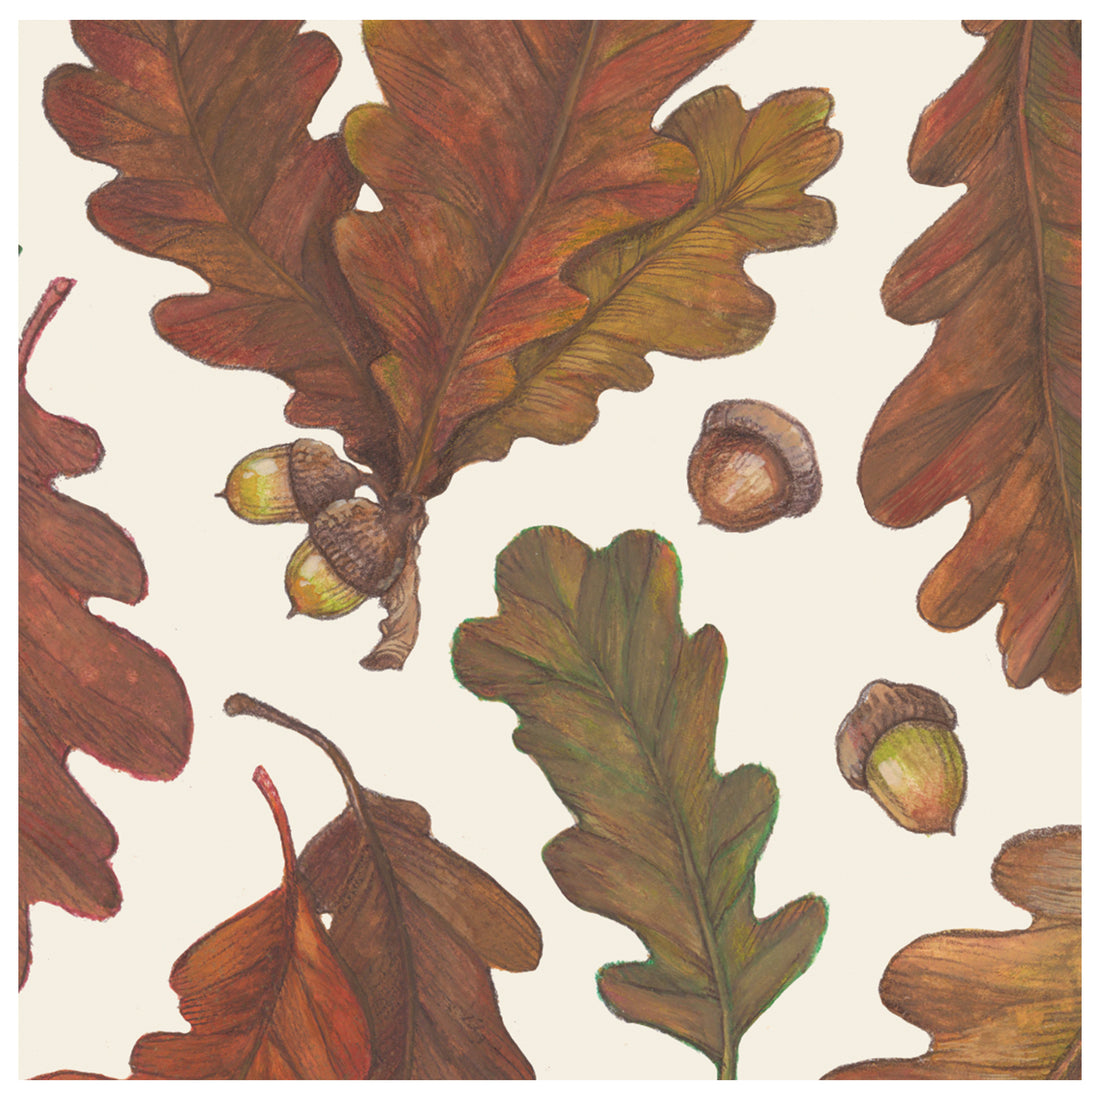 An edge-to-edge design of orange and brown oak leaves scattered with acorns on a white background, on a square cocktail napkin.